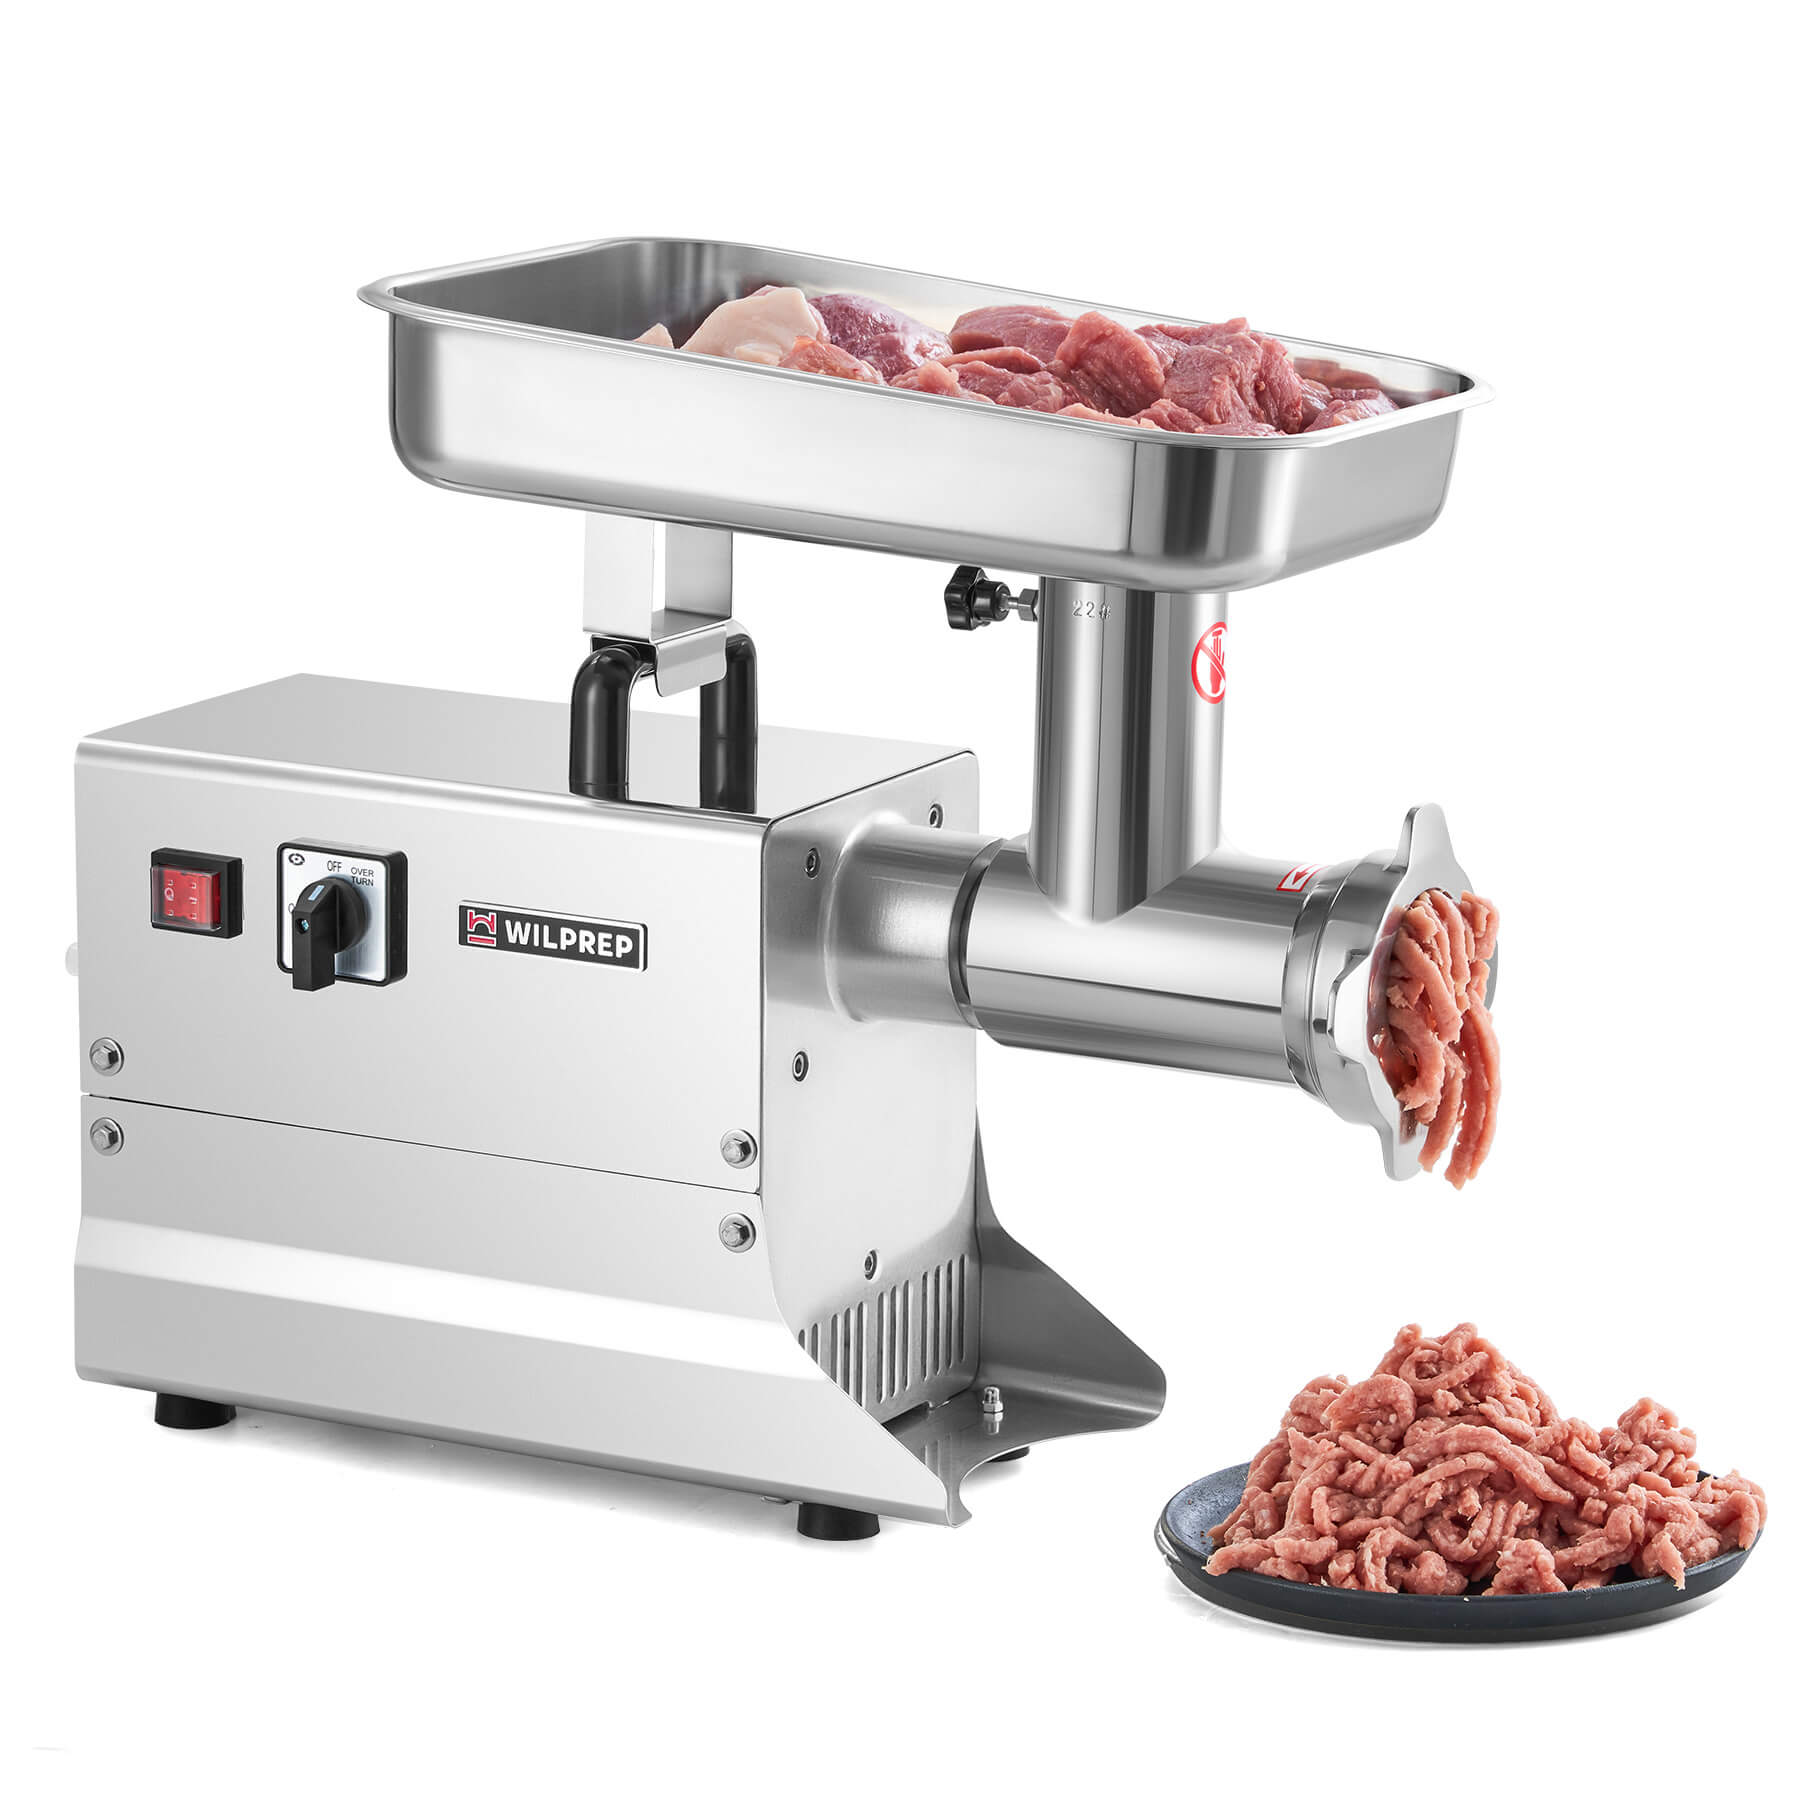 1100W Electric Meat Grinder with Reverse Function ETL Approved-110V,1 1/2hp